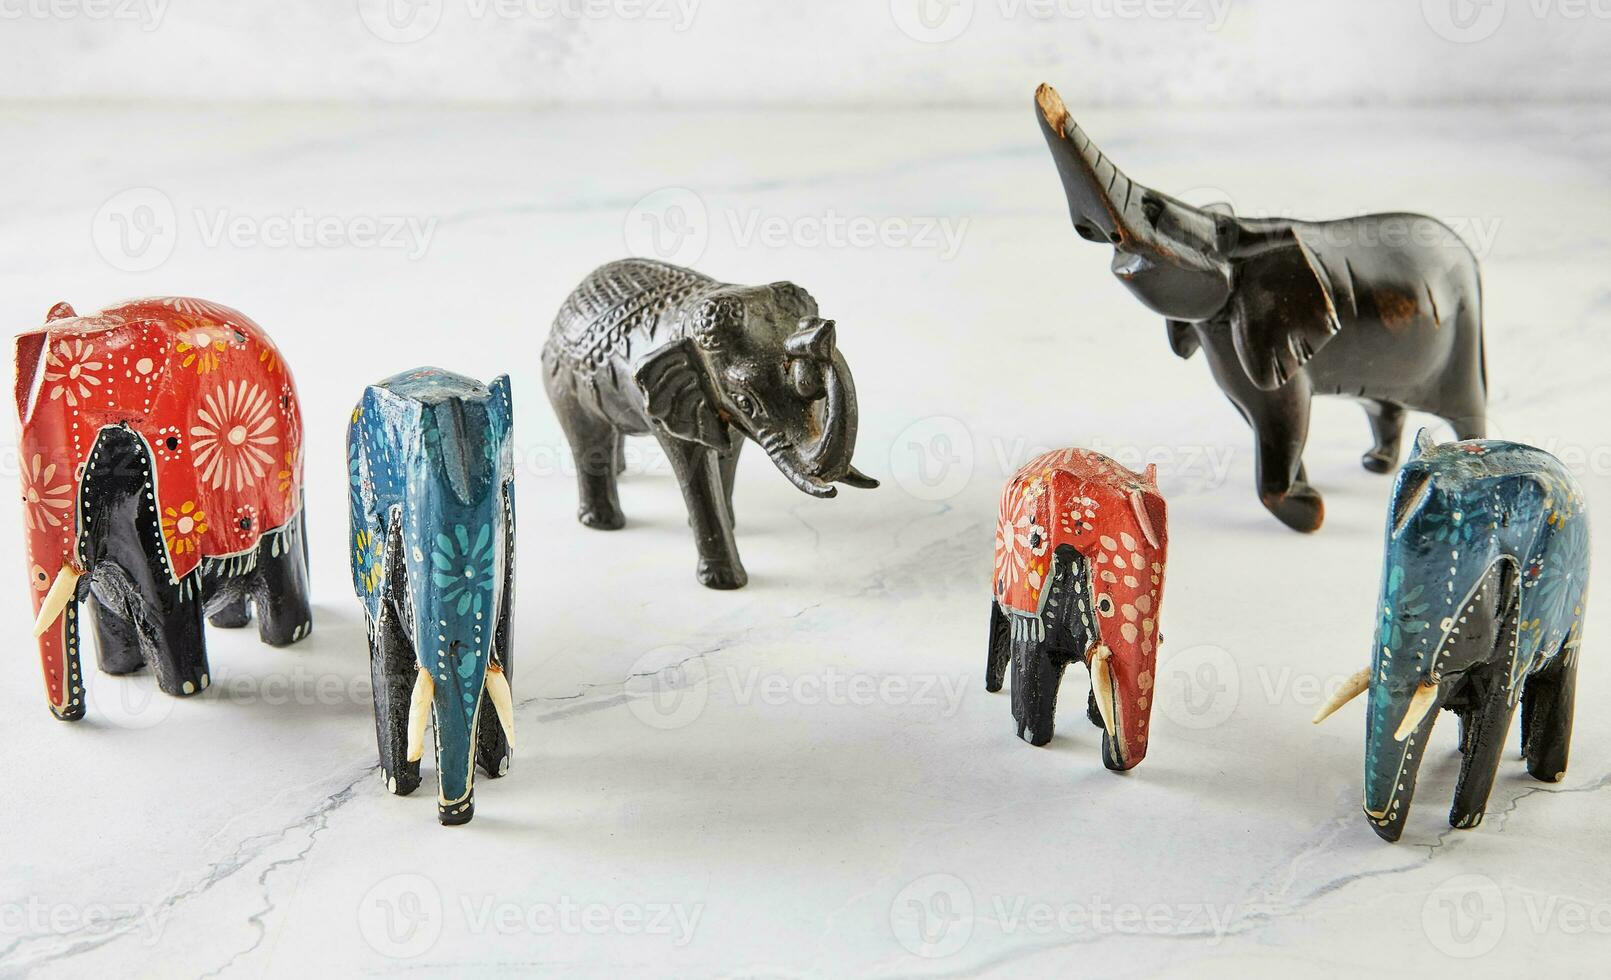 Elephant figurines of different colors and shapes on white marble photo